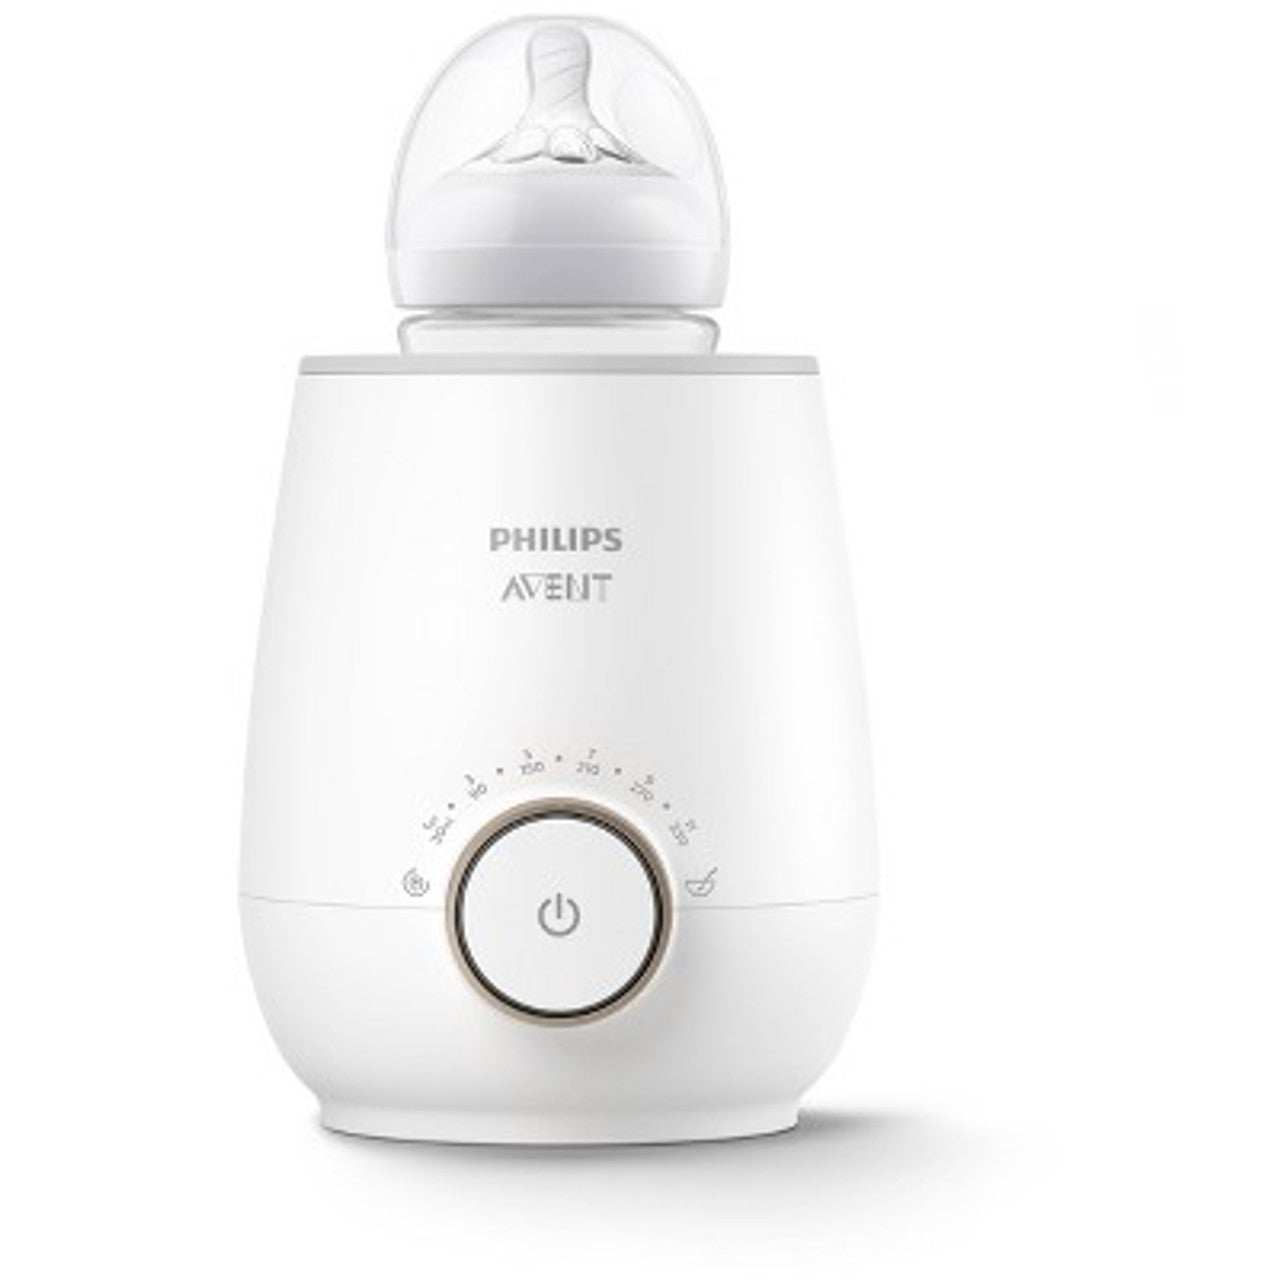 New Philips Avent Fast Baby Bottle Warmer with Auto Shut Off